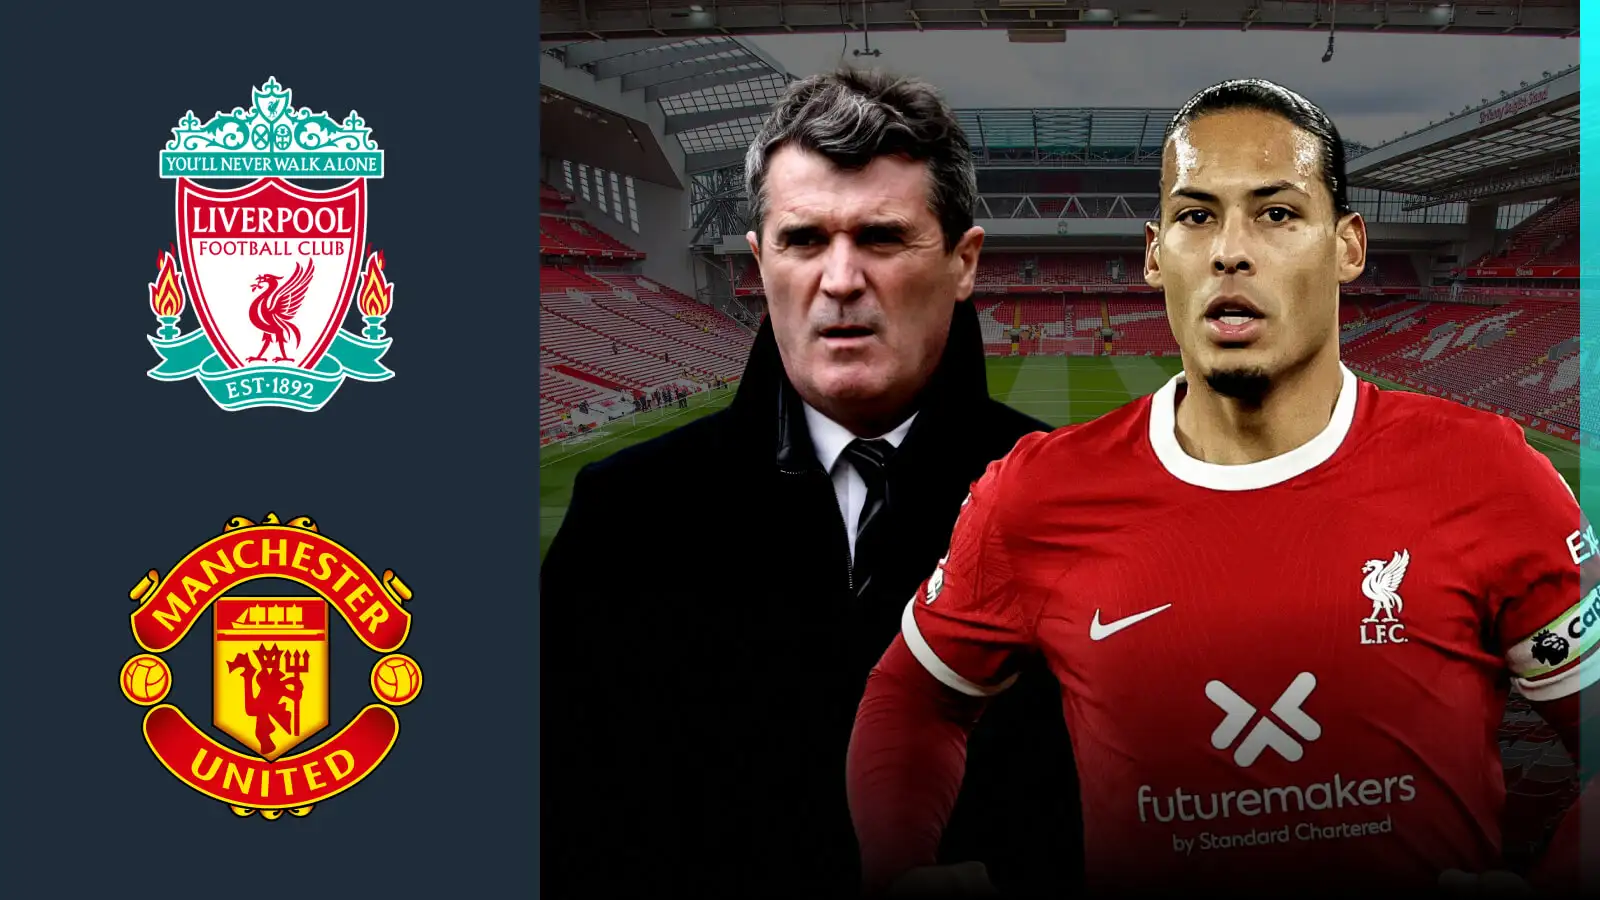 Virgil van Dijk and also Roy Keane through Liverpool and also Manchester United badges